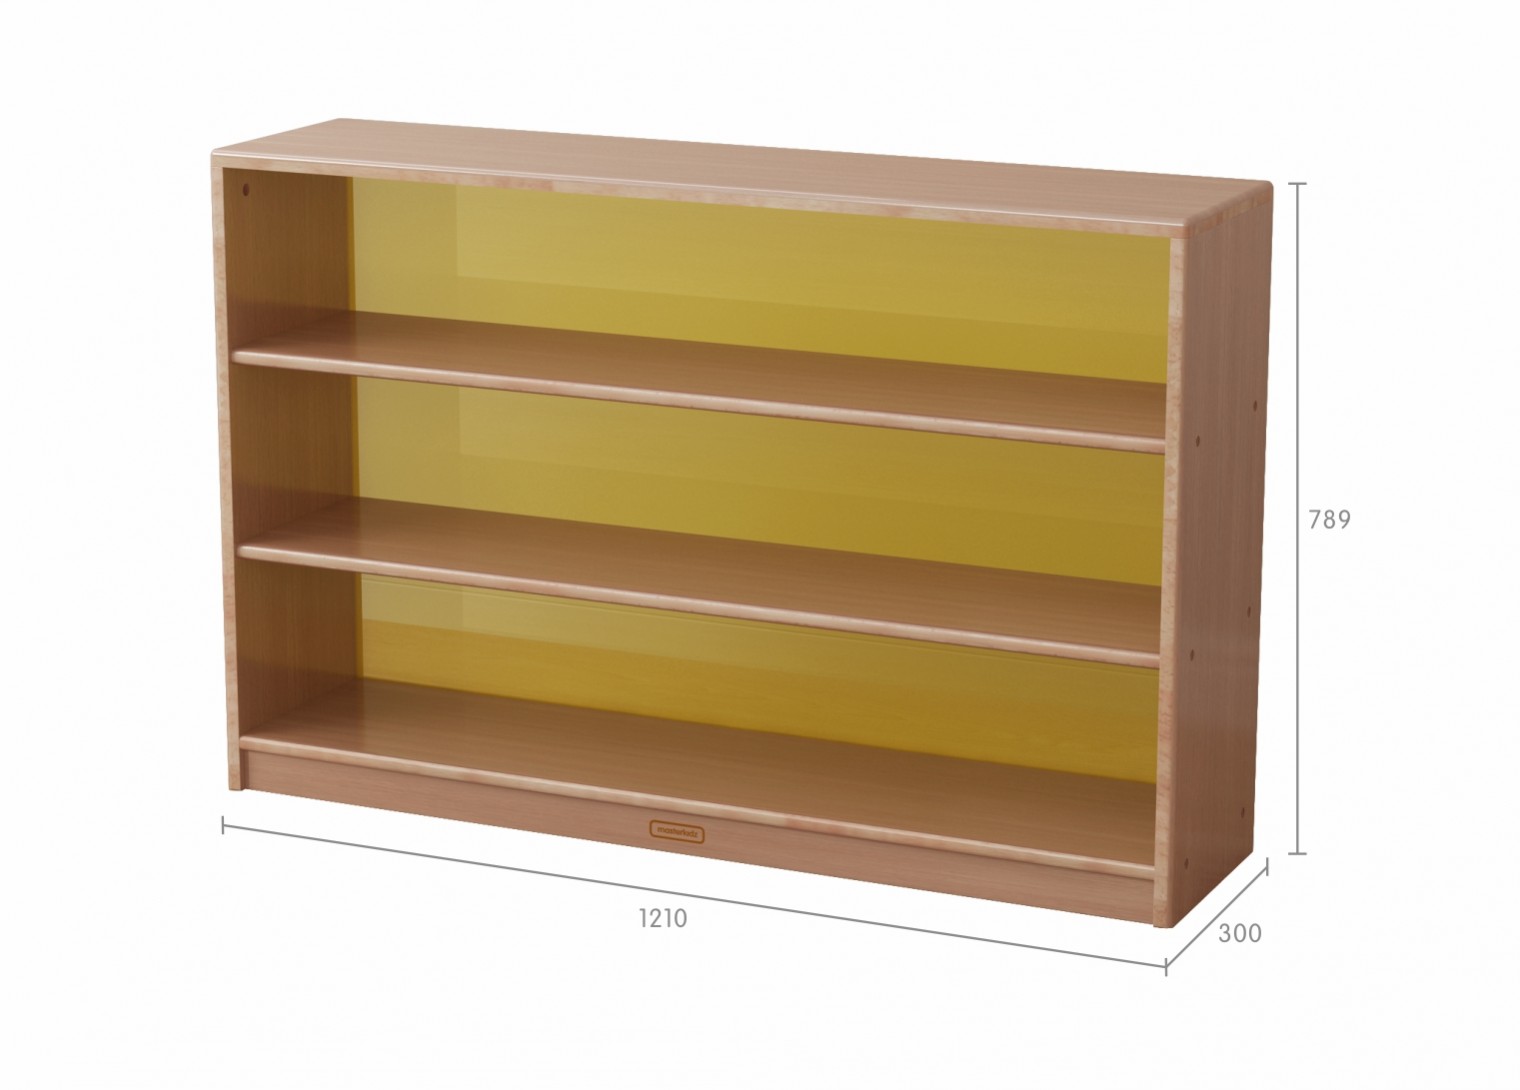 Forest School - 789H x 1210L Wooden  Shelving Unit - Translucent Yellow Back